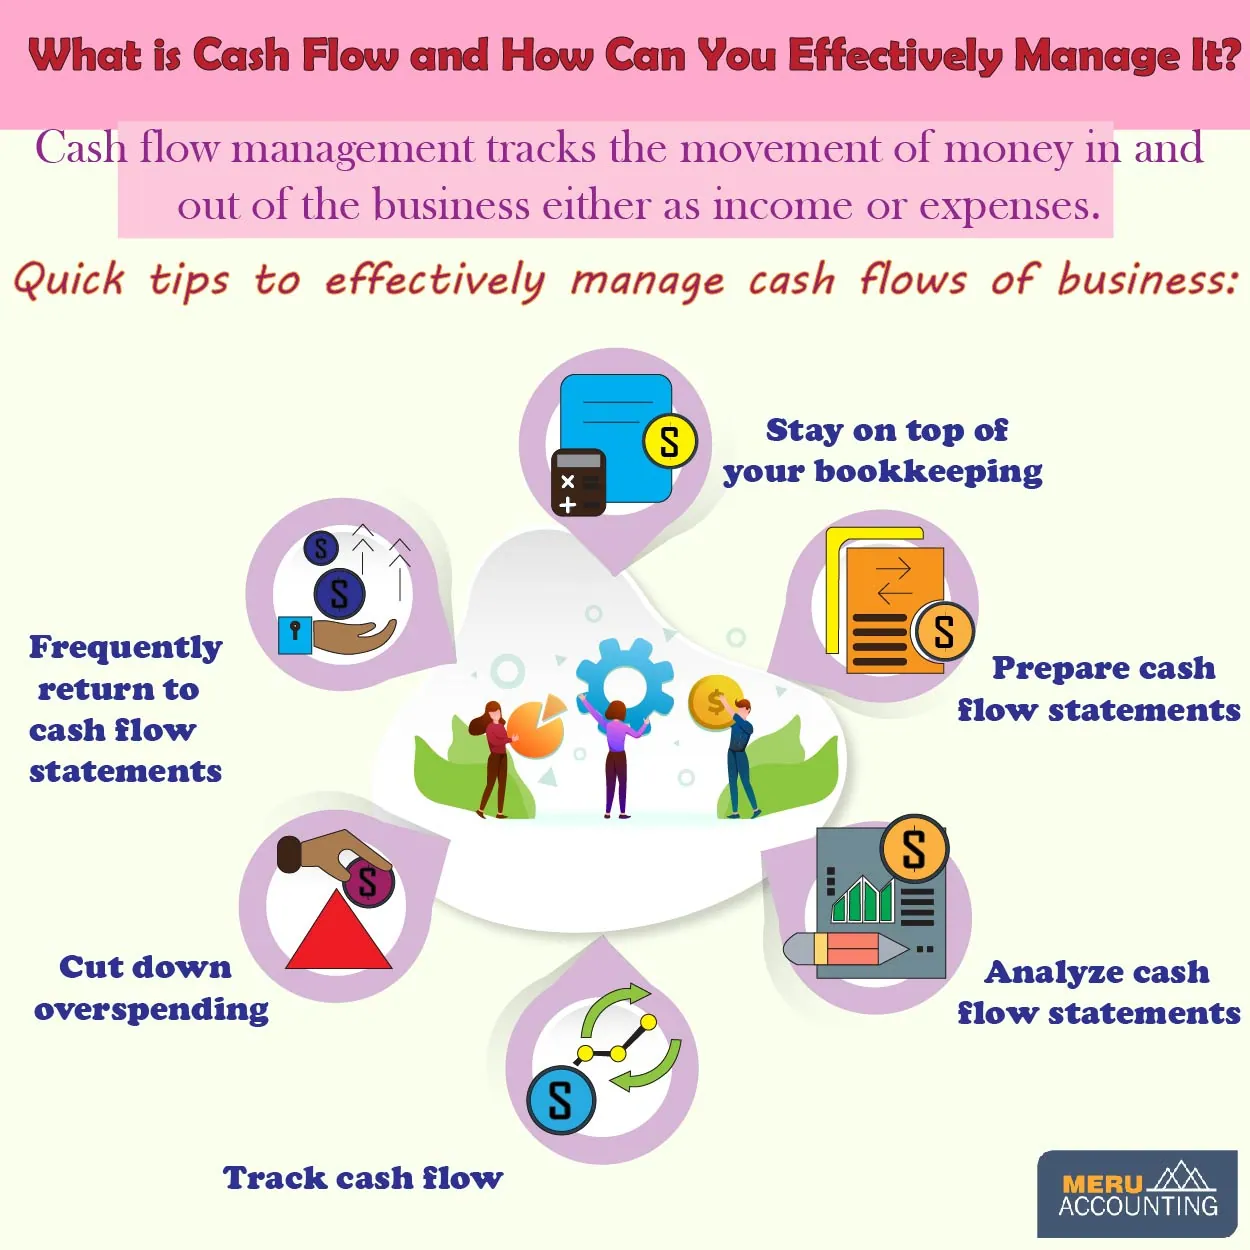 cash flow management>
<br>

<h3>Efficient and proper bookkeeping:</h3>

<p>You can get your books accurate without efficient bookkeeping. It is the first step to understanding the financials of your business. You can move ahead unless you got your bookkeeping done.</p>

<h3>Cash Flow statements on the table:</h3>

<p>It helps to analyze the cash position and make projections to see how your decisions will impact your future financial health.</p>

<p>If you have an in-house accountant, they can do this for you. Or else you can use software or spreadsheets but again it will require basic finance knowledge and time and effort. The most time-saving way is to outsource <strong>cash flow management</strong> to professional firms like <a  data-cke-saved-href=